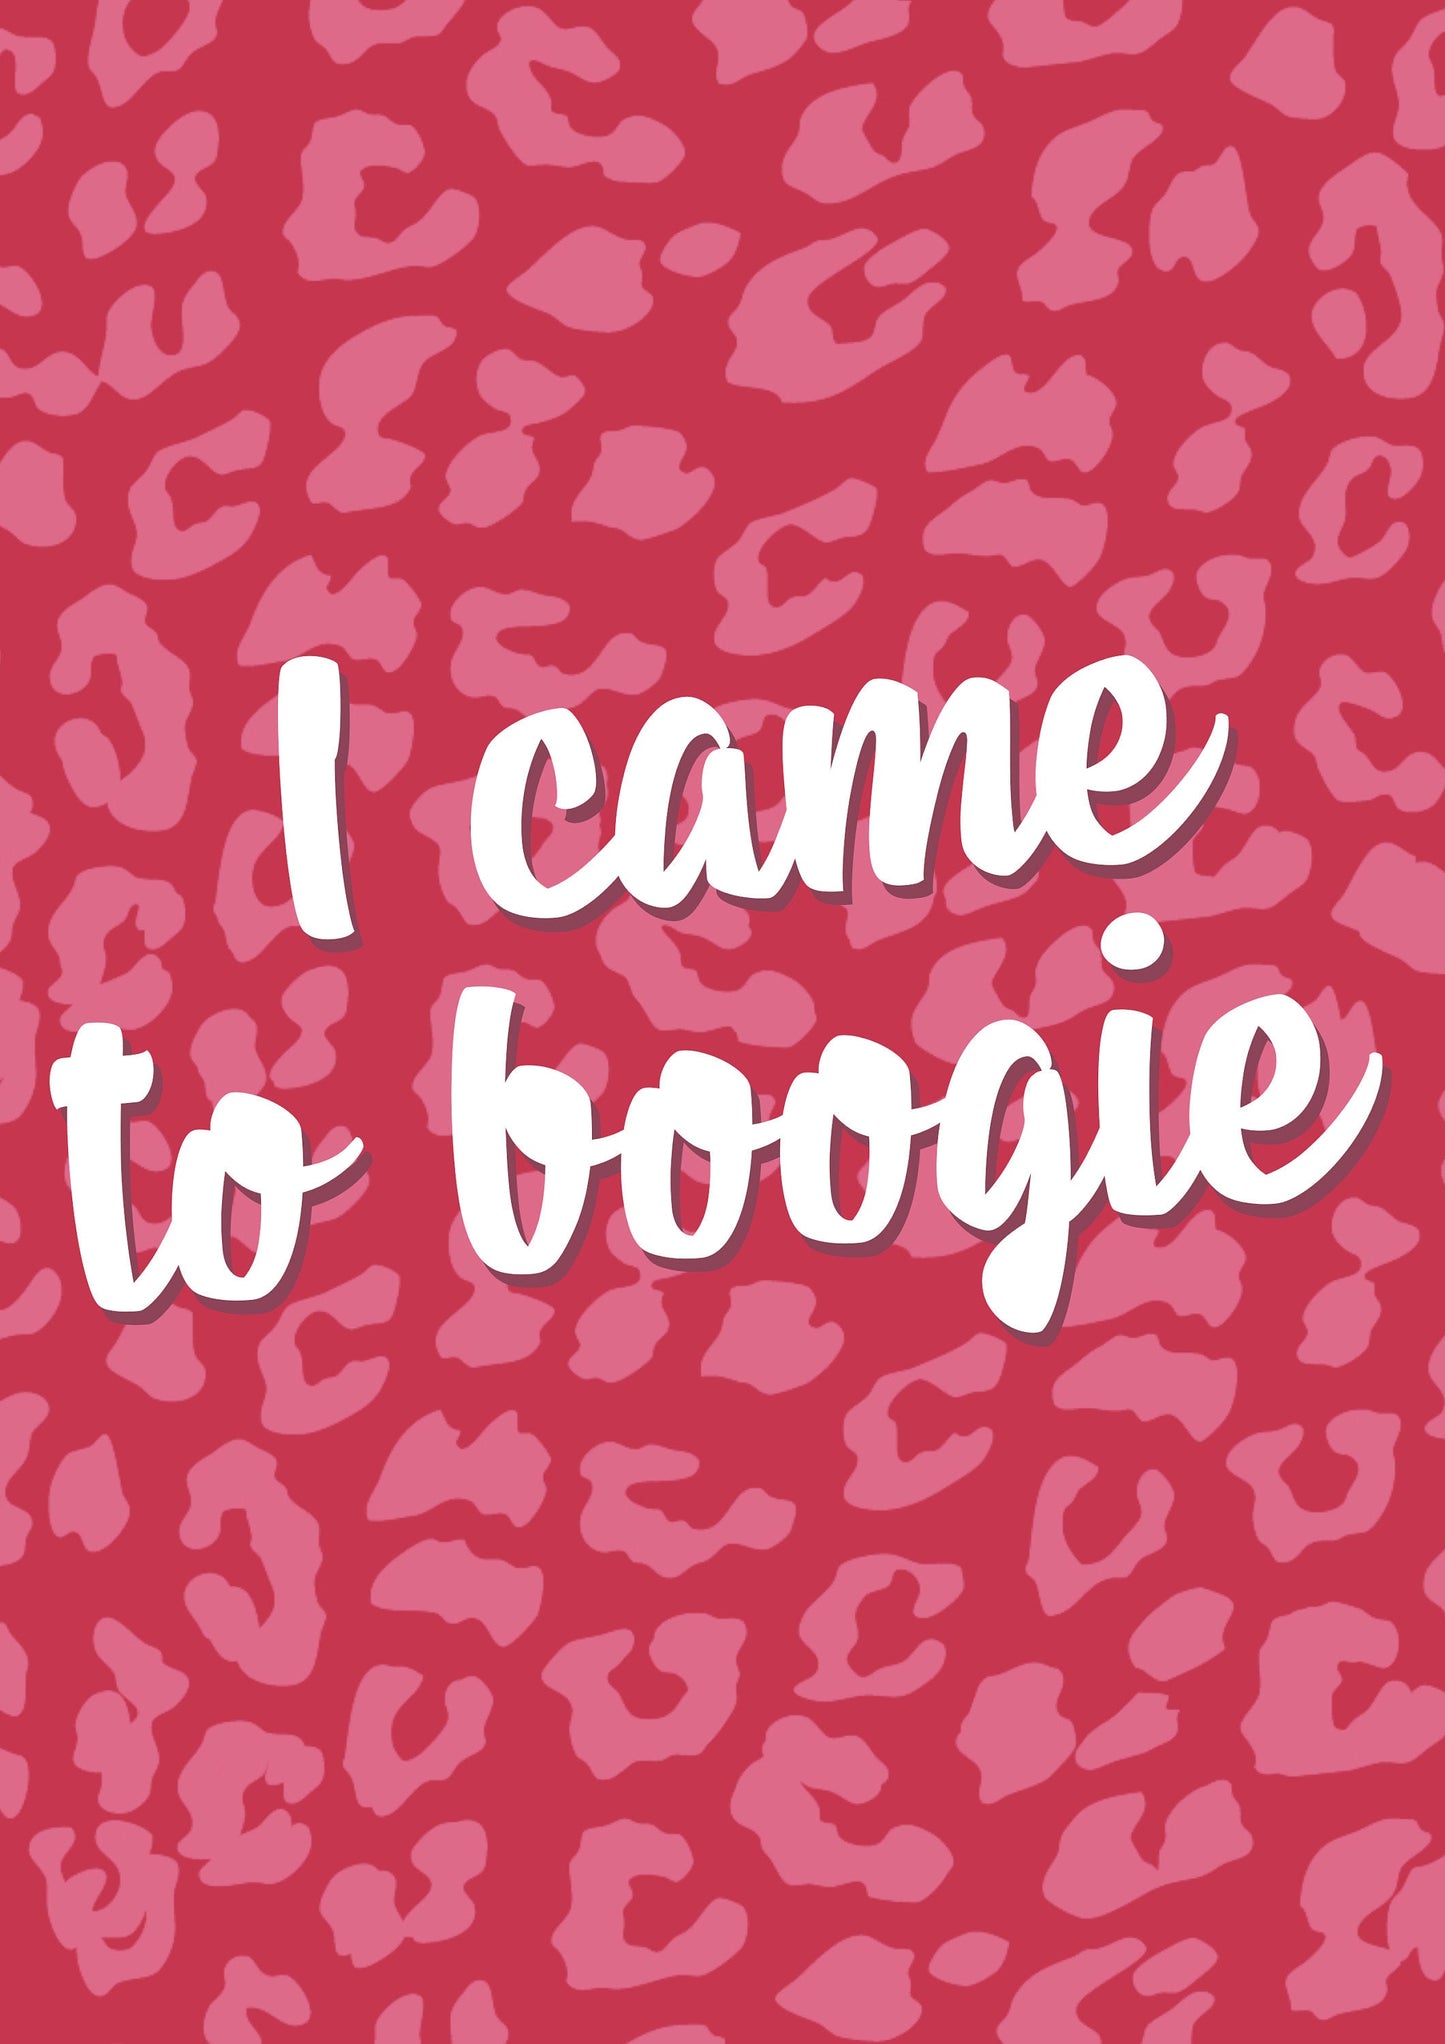 I Came To Boogie Animal Print Dancing Quote Typography Print